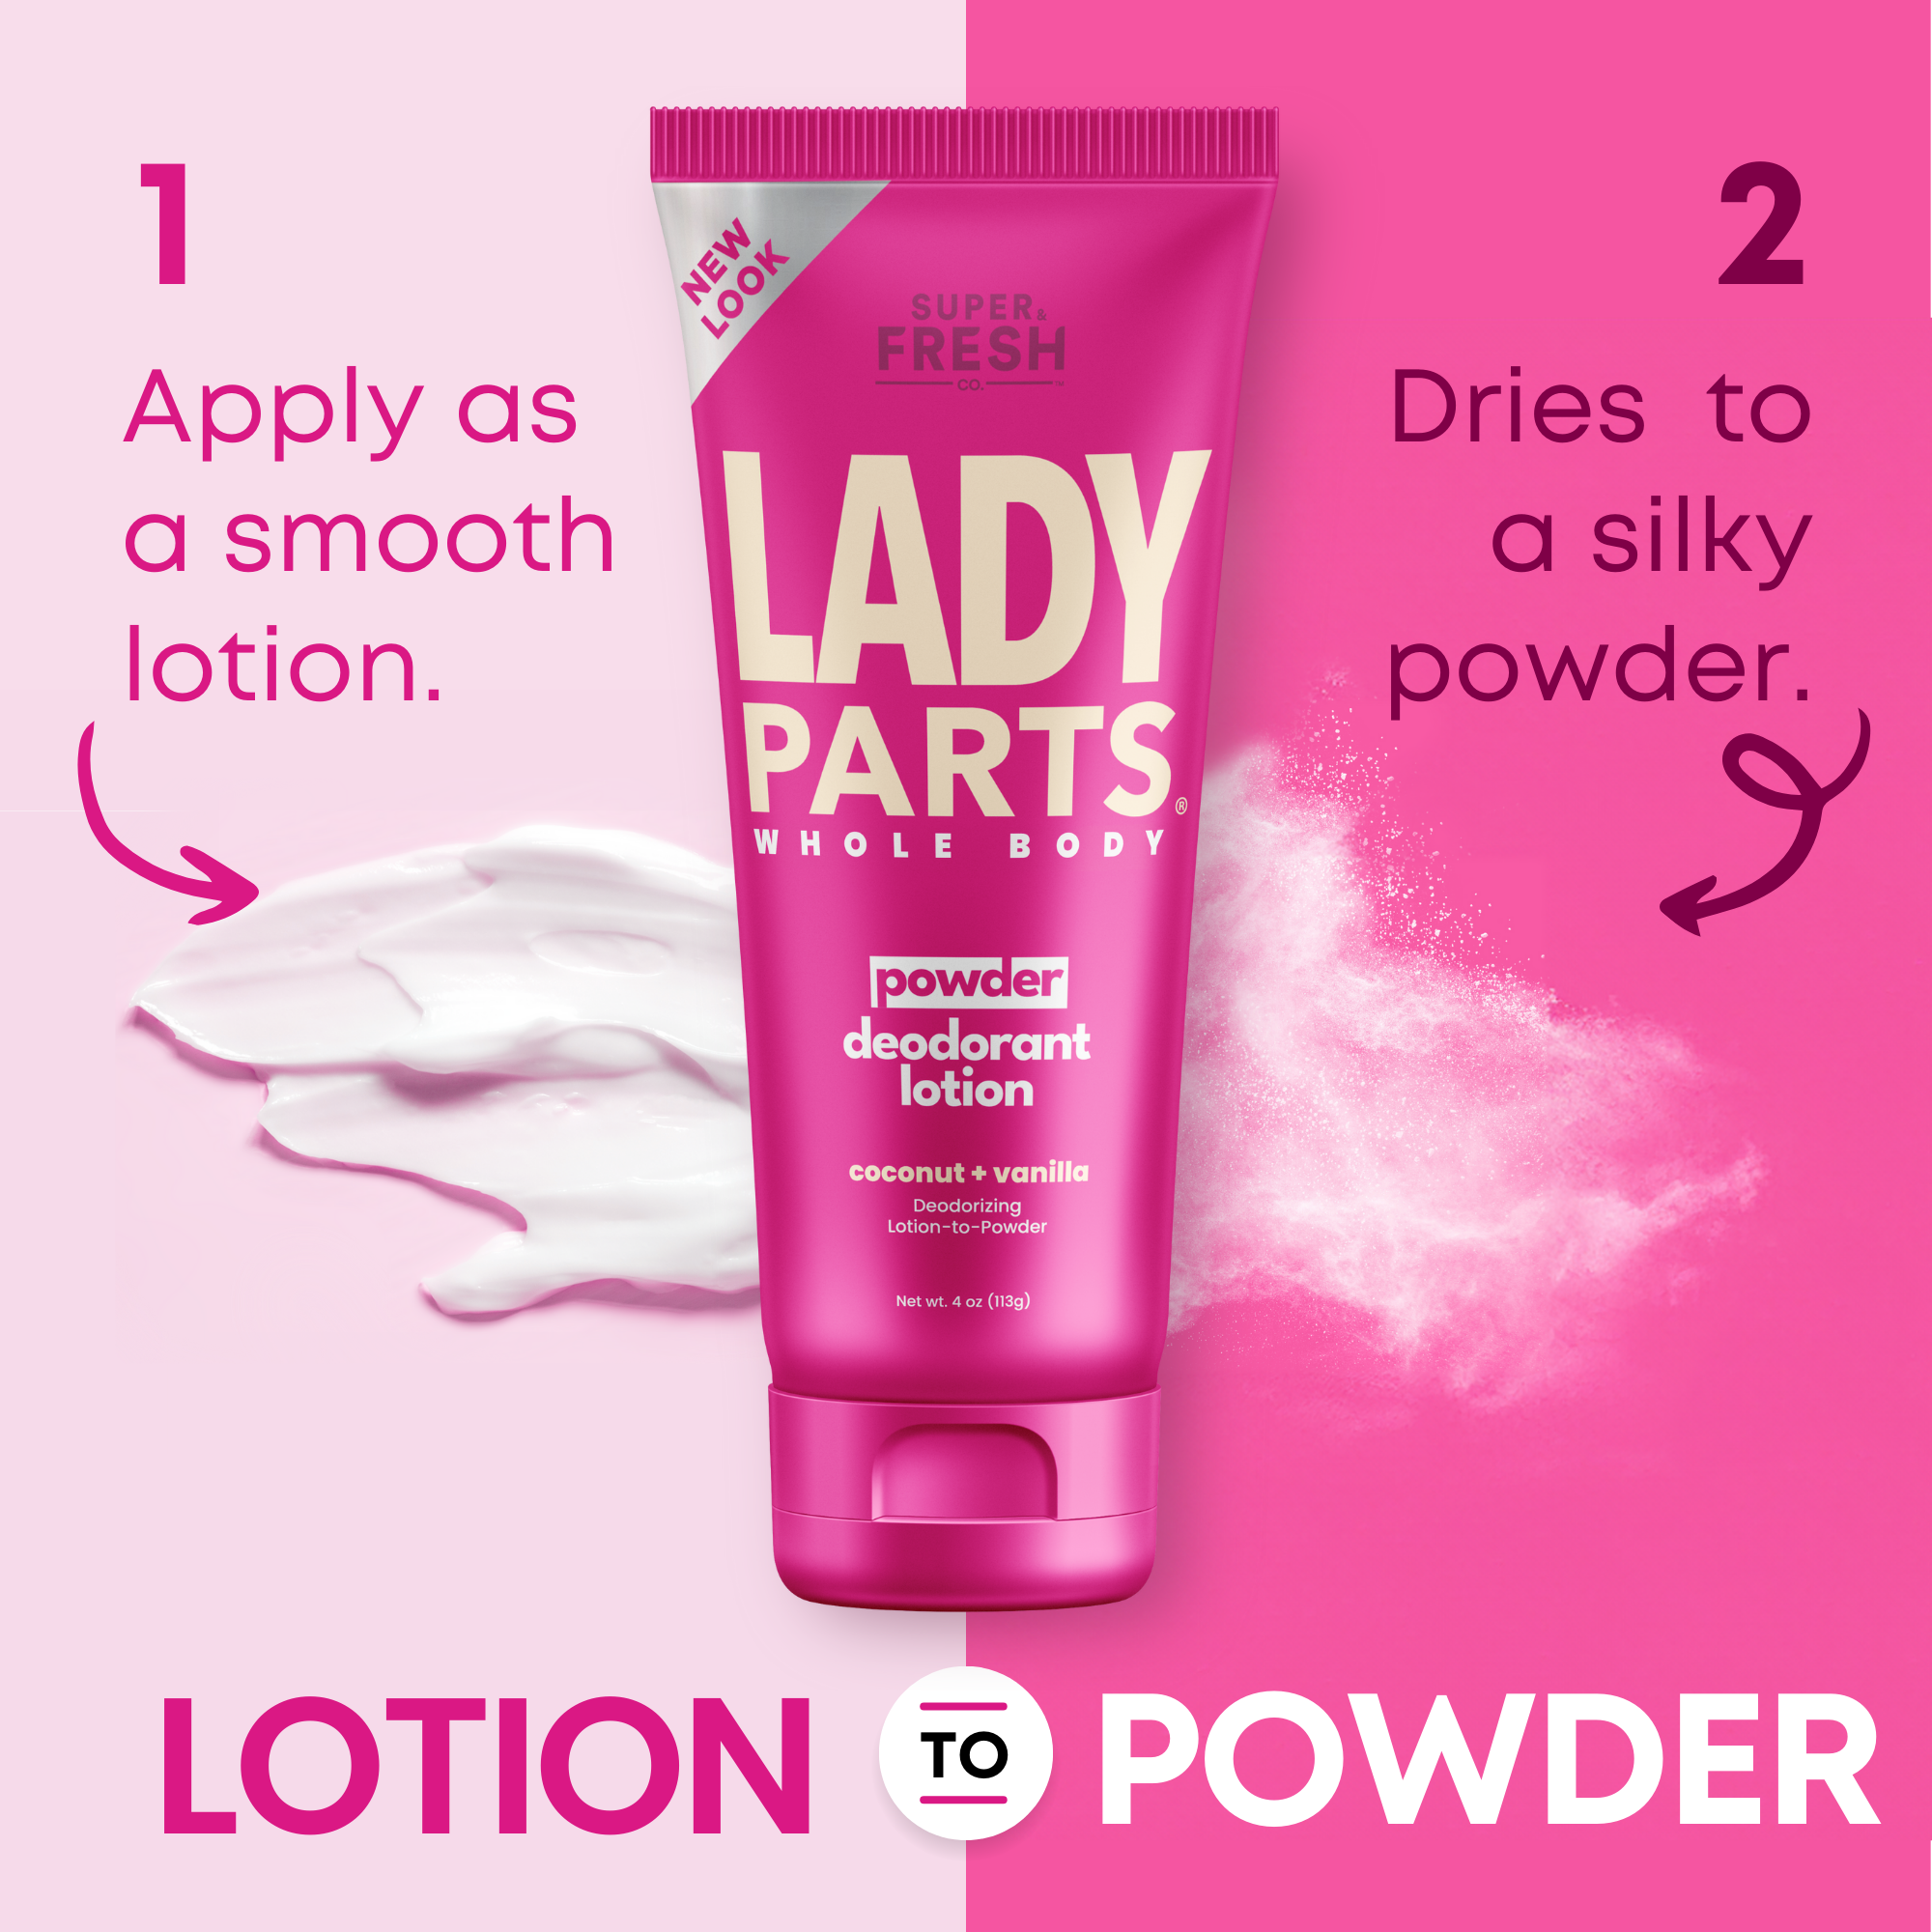 Lady Parts Feminine Hygiene Body Powder Deodorant Lotion For Breasts,  Private Parts, Crotch & Inner Thigh to Stop Odor & Friction - Aluminum Free